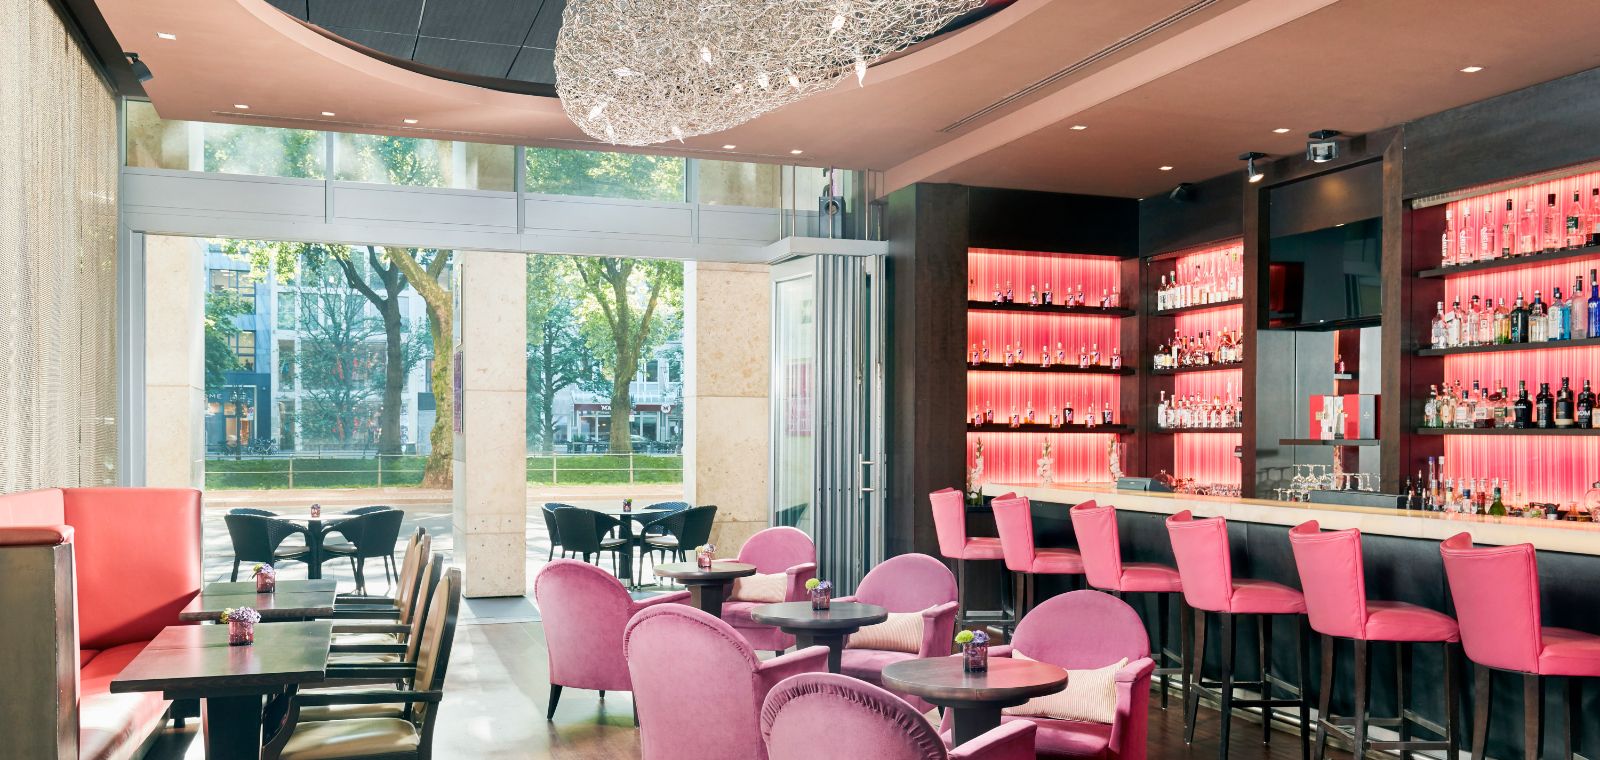 Insight into the hotel bar Dusseldorf with red seating options